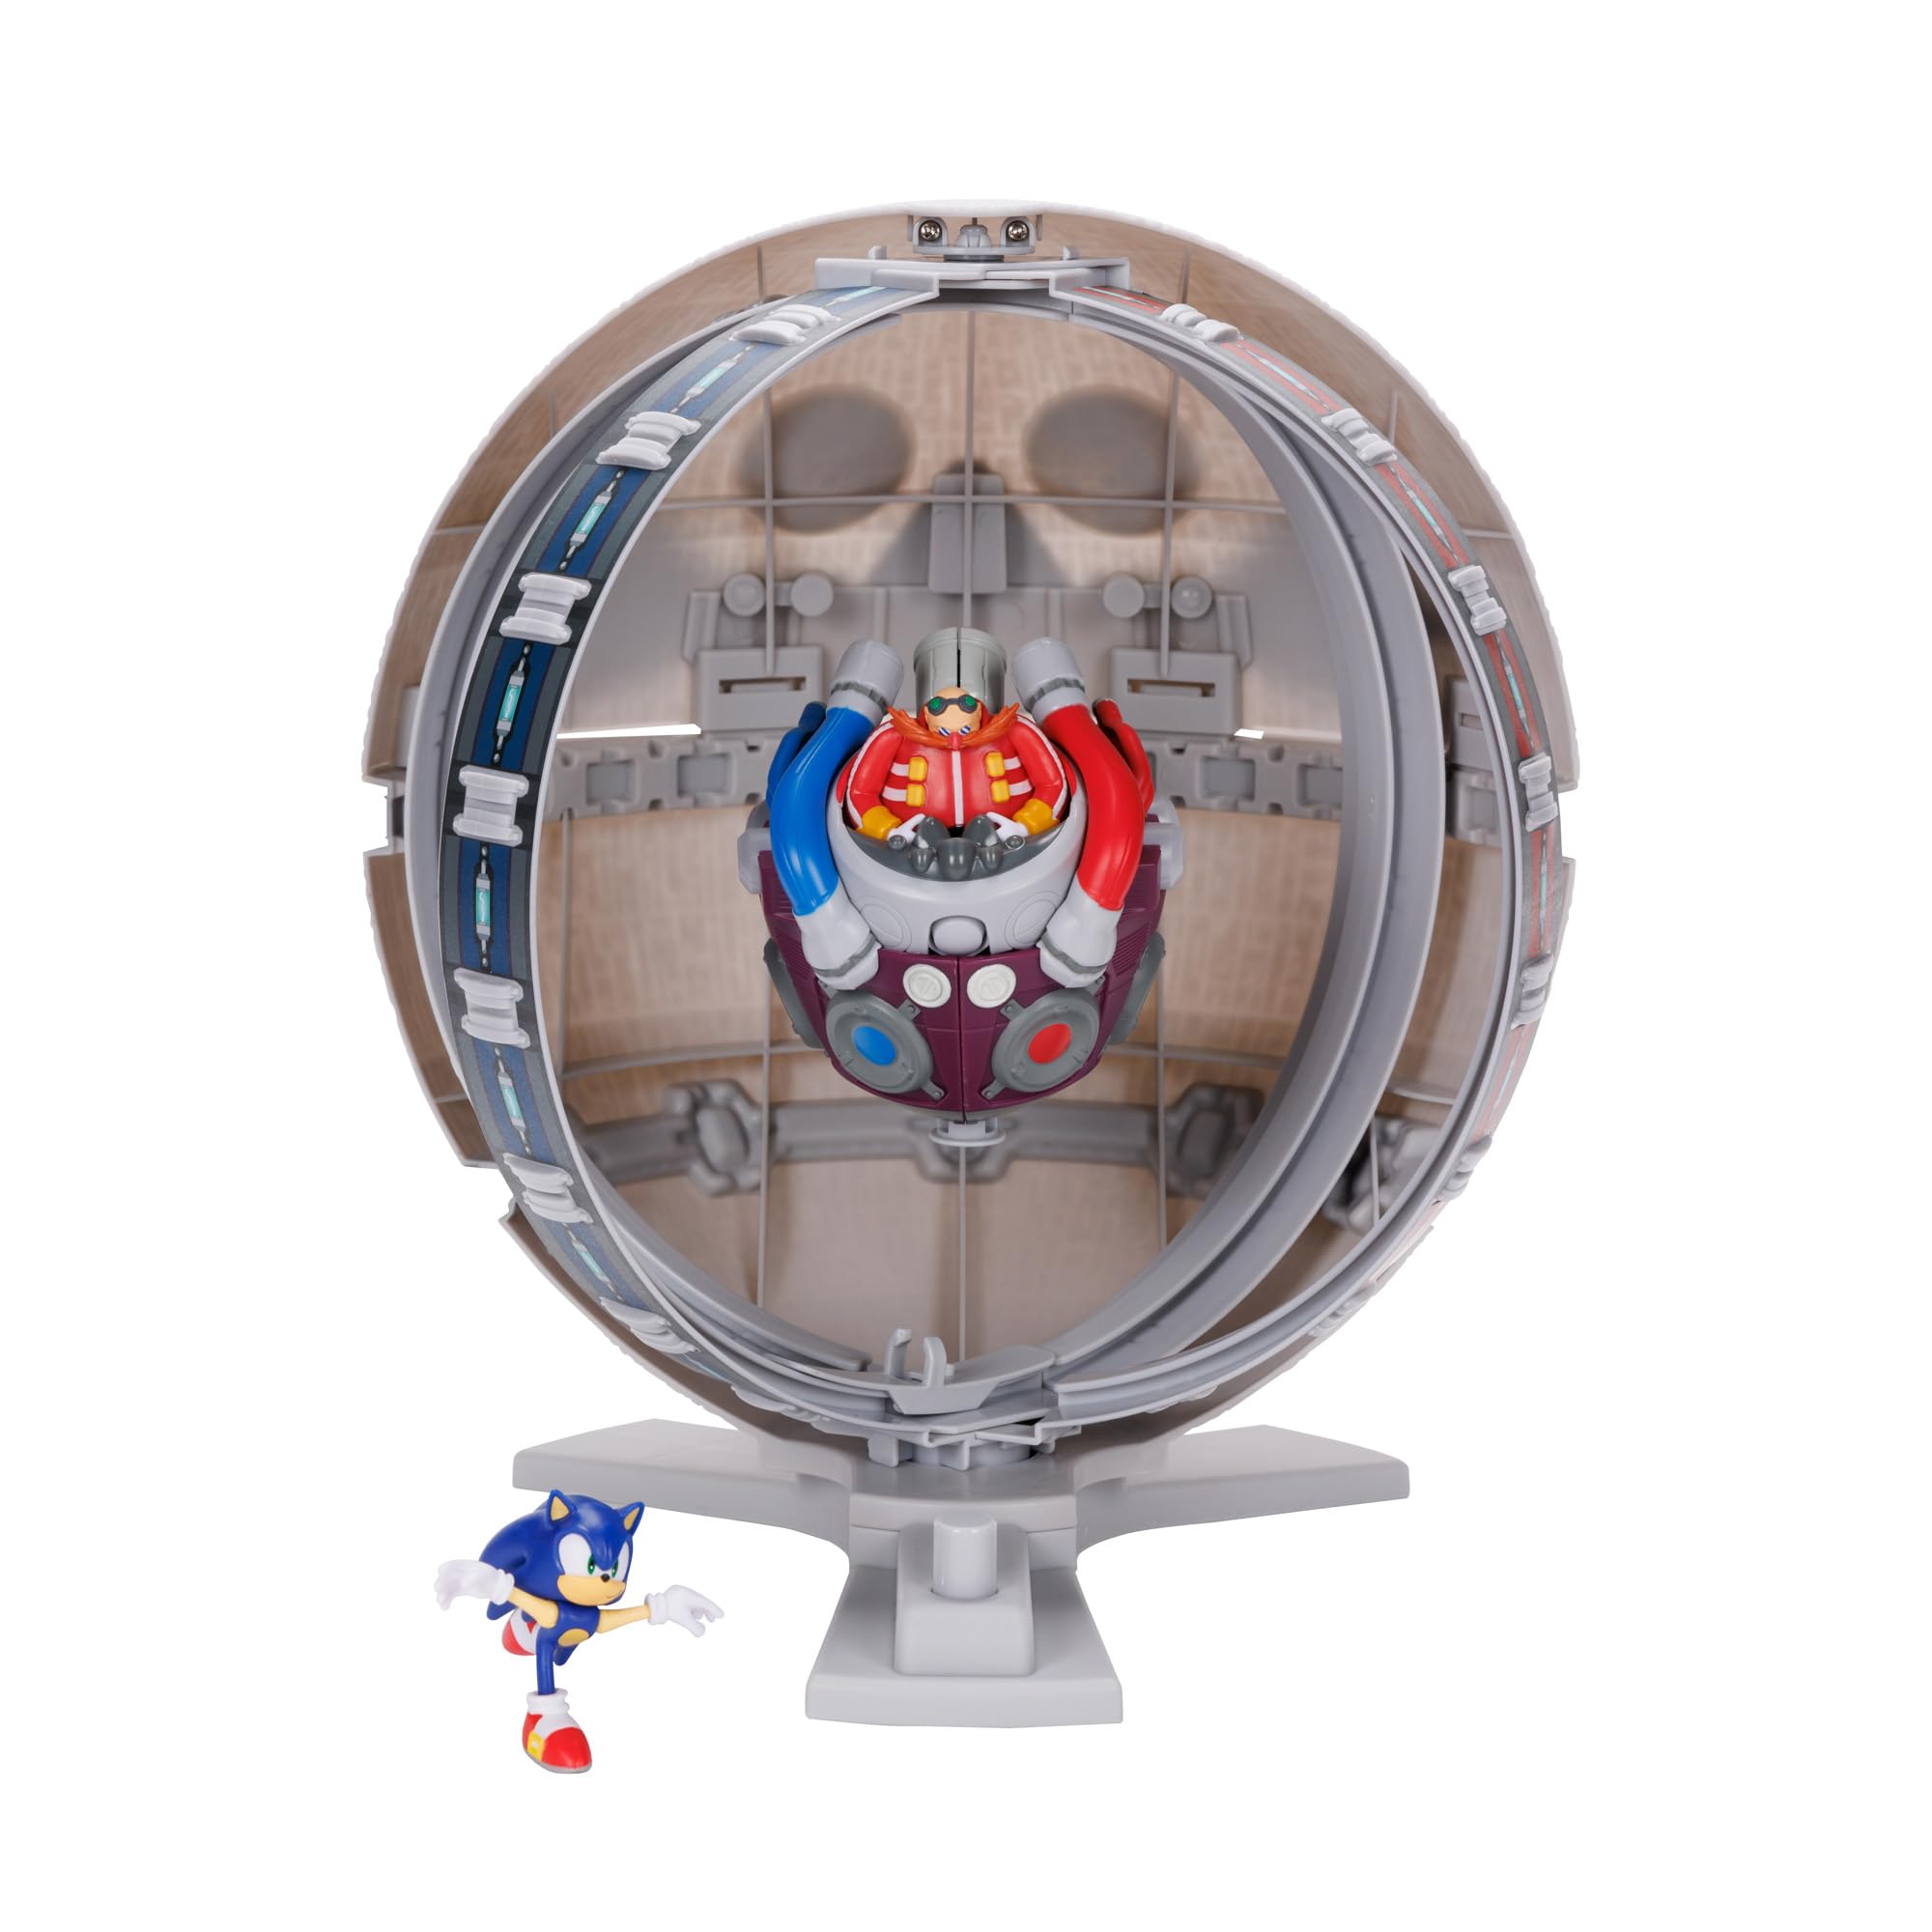 12" Sonic The Hedgehog Death Egg Playset w/ 2.5" Sonic Figure $13.31 + Free Shipping w/ Prime or on $35+